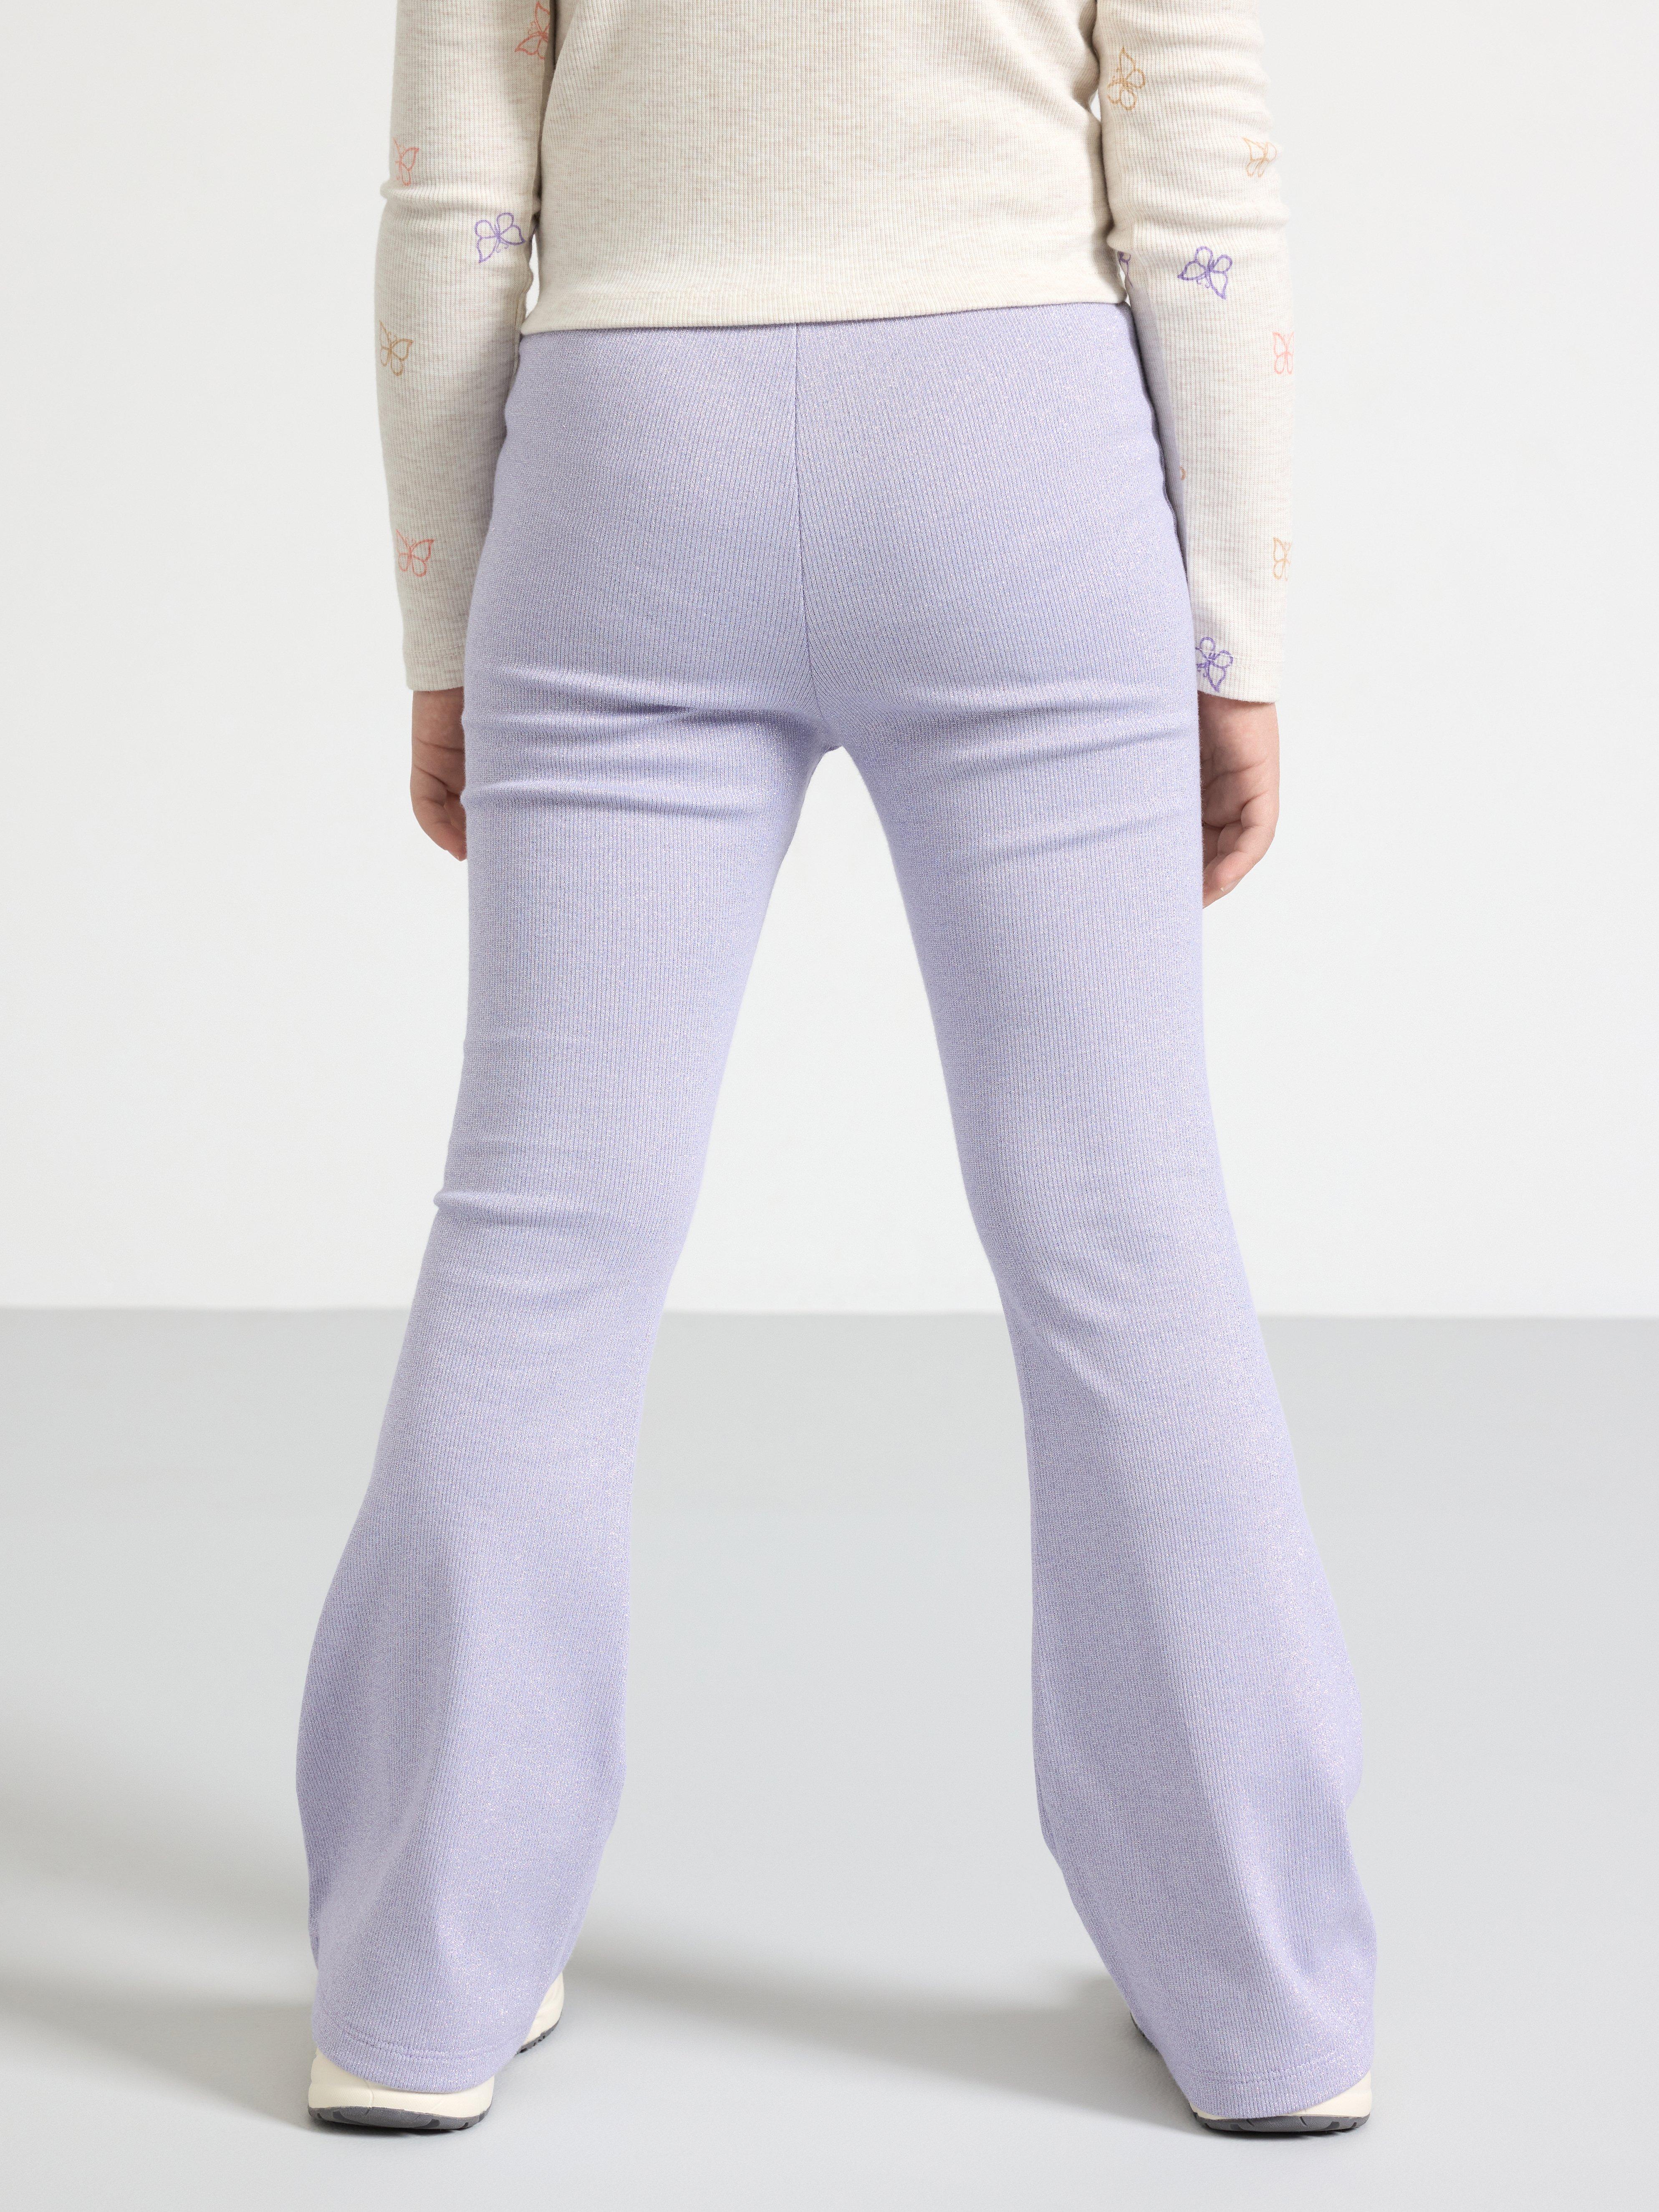 https://i8.amplience.net/i/Lindex/8633115_9613_PS_MB/lilac-ribbed-trousers-with-shimmer?fmt=auto&$qltDefault$&$cache$&$crop$&$scaleFit$&$productDetailSwiperV2$&vw=600&$crop2x$&$fmtQlt2x$